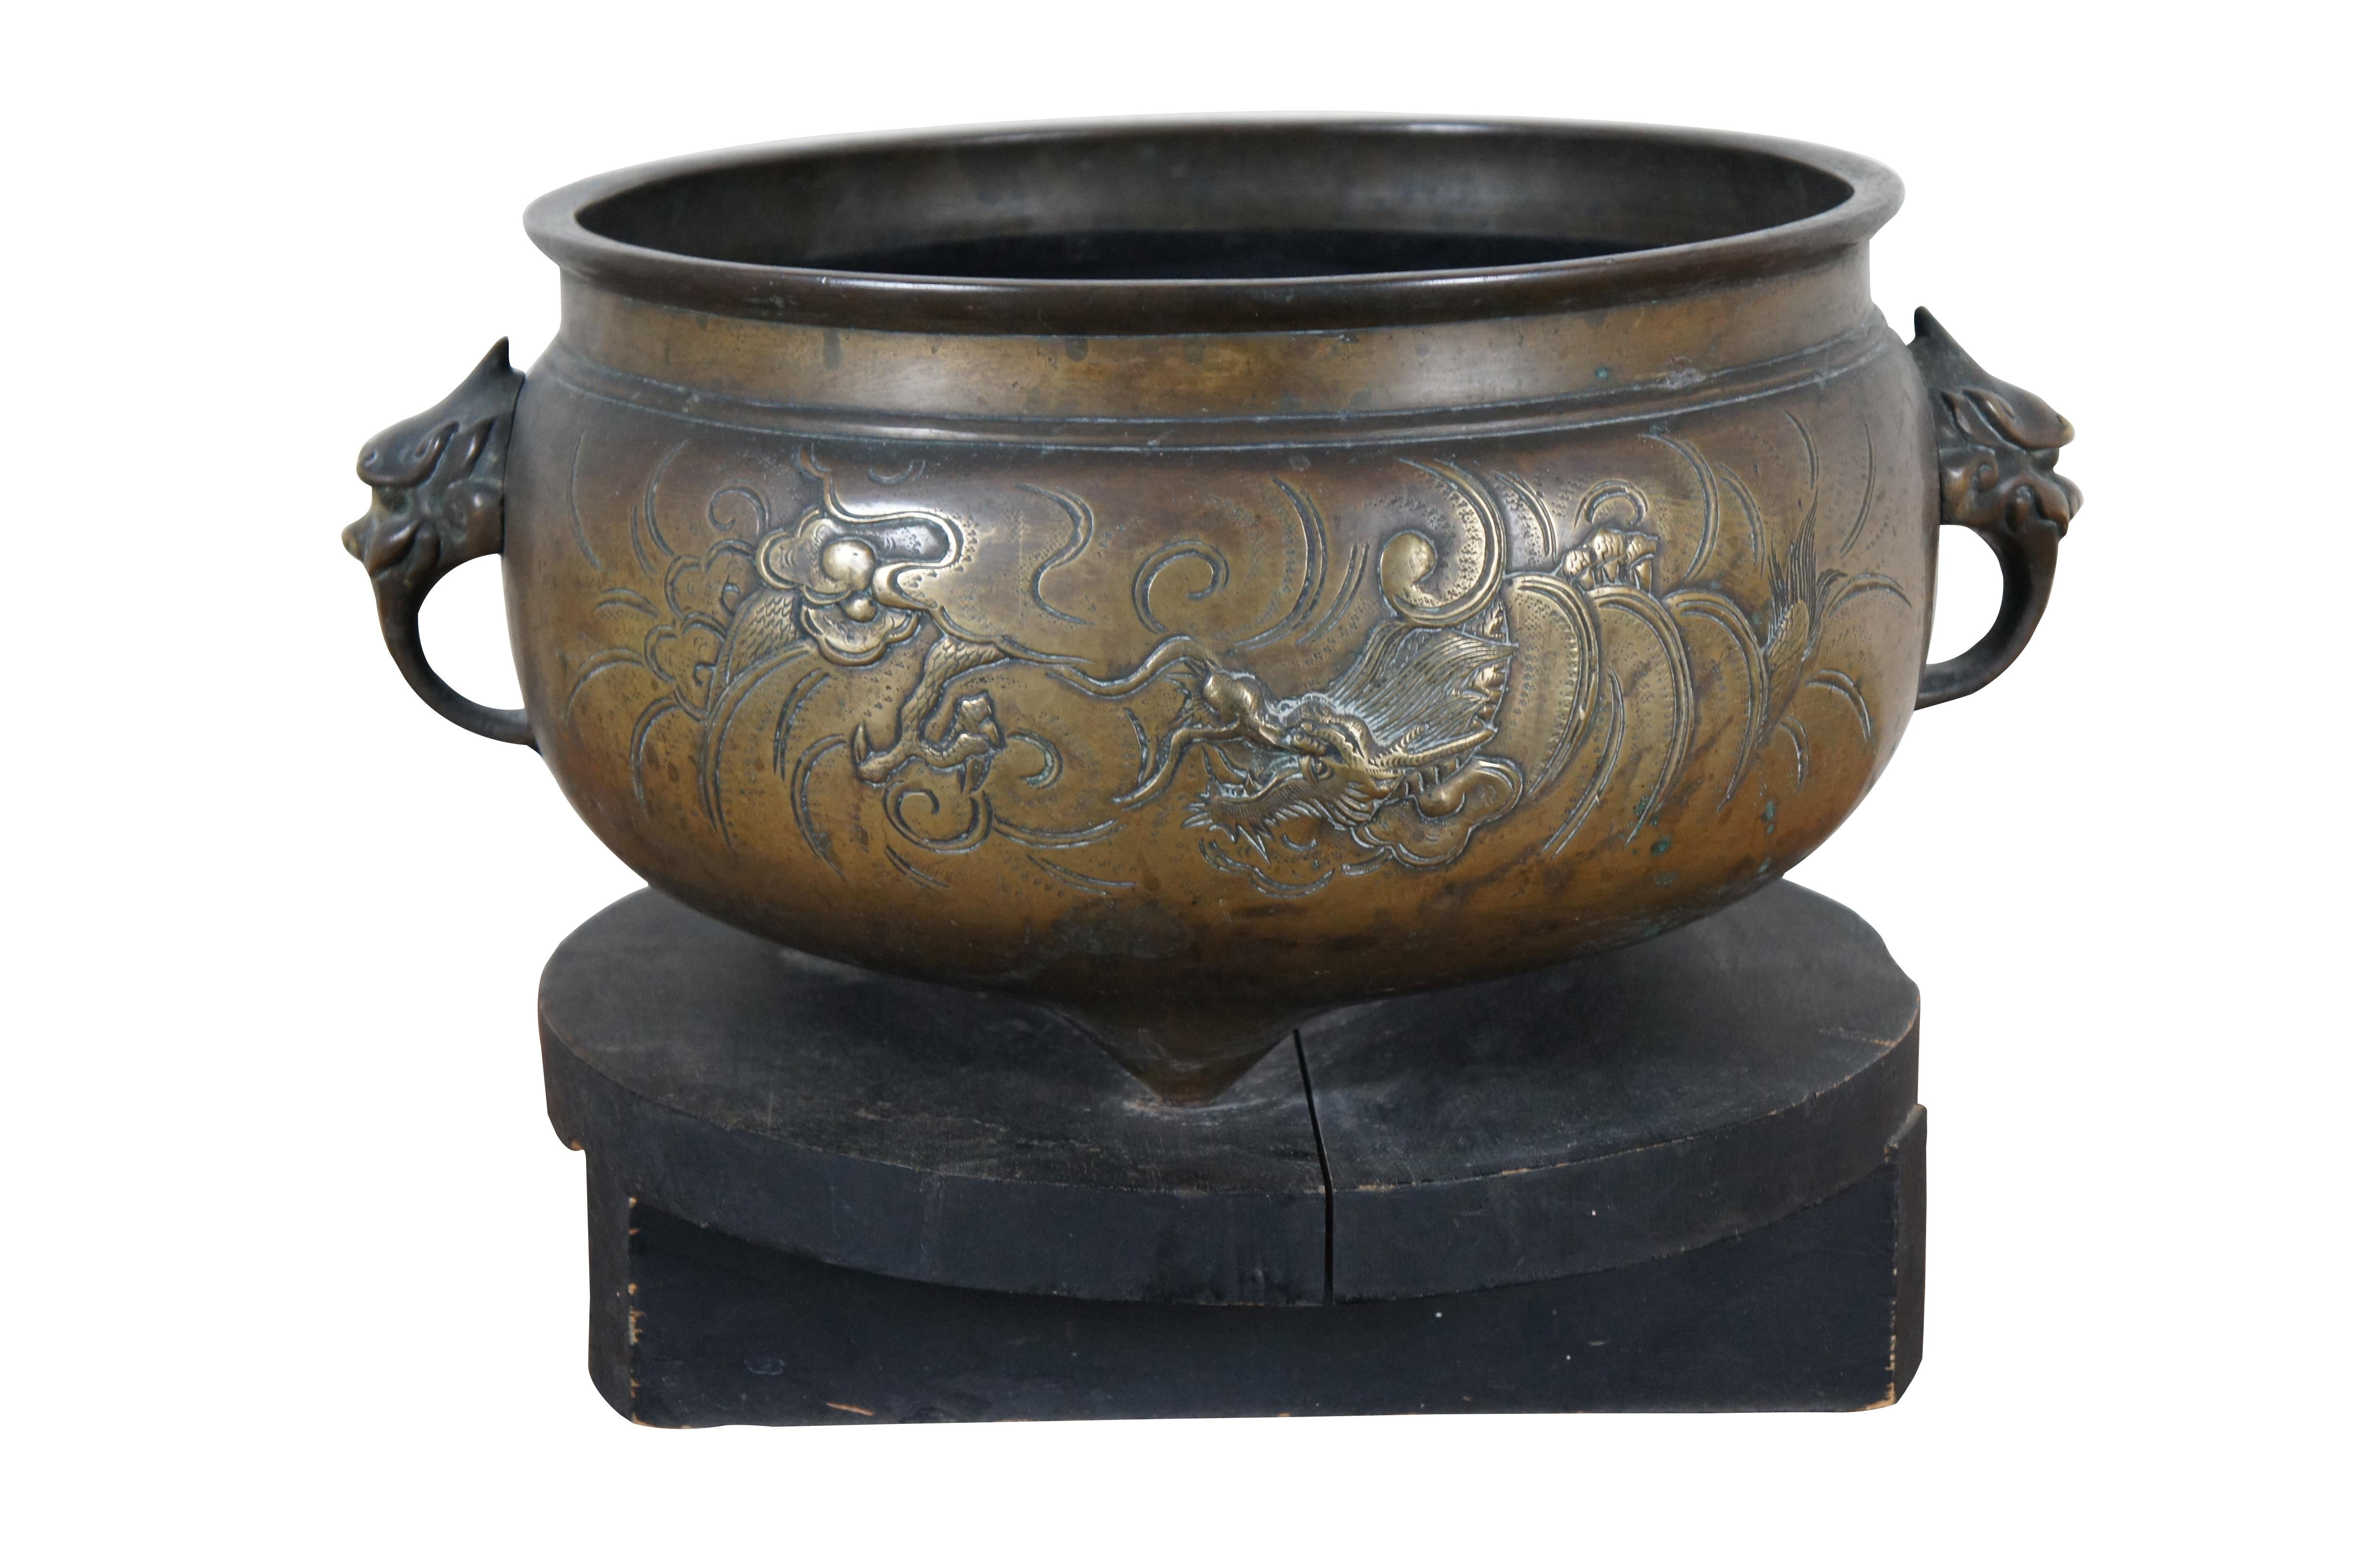 A large and impressive antique Chinese bronze Temple censer bowl on stand featuring a Phoenix on one side and Dragon on the other, with Feng Shui beast head handles and wood stand.

Dimensions:
17